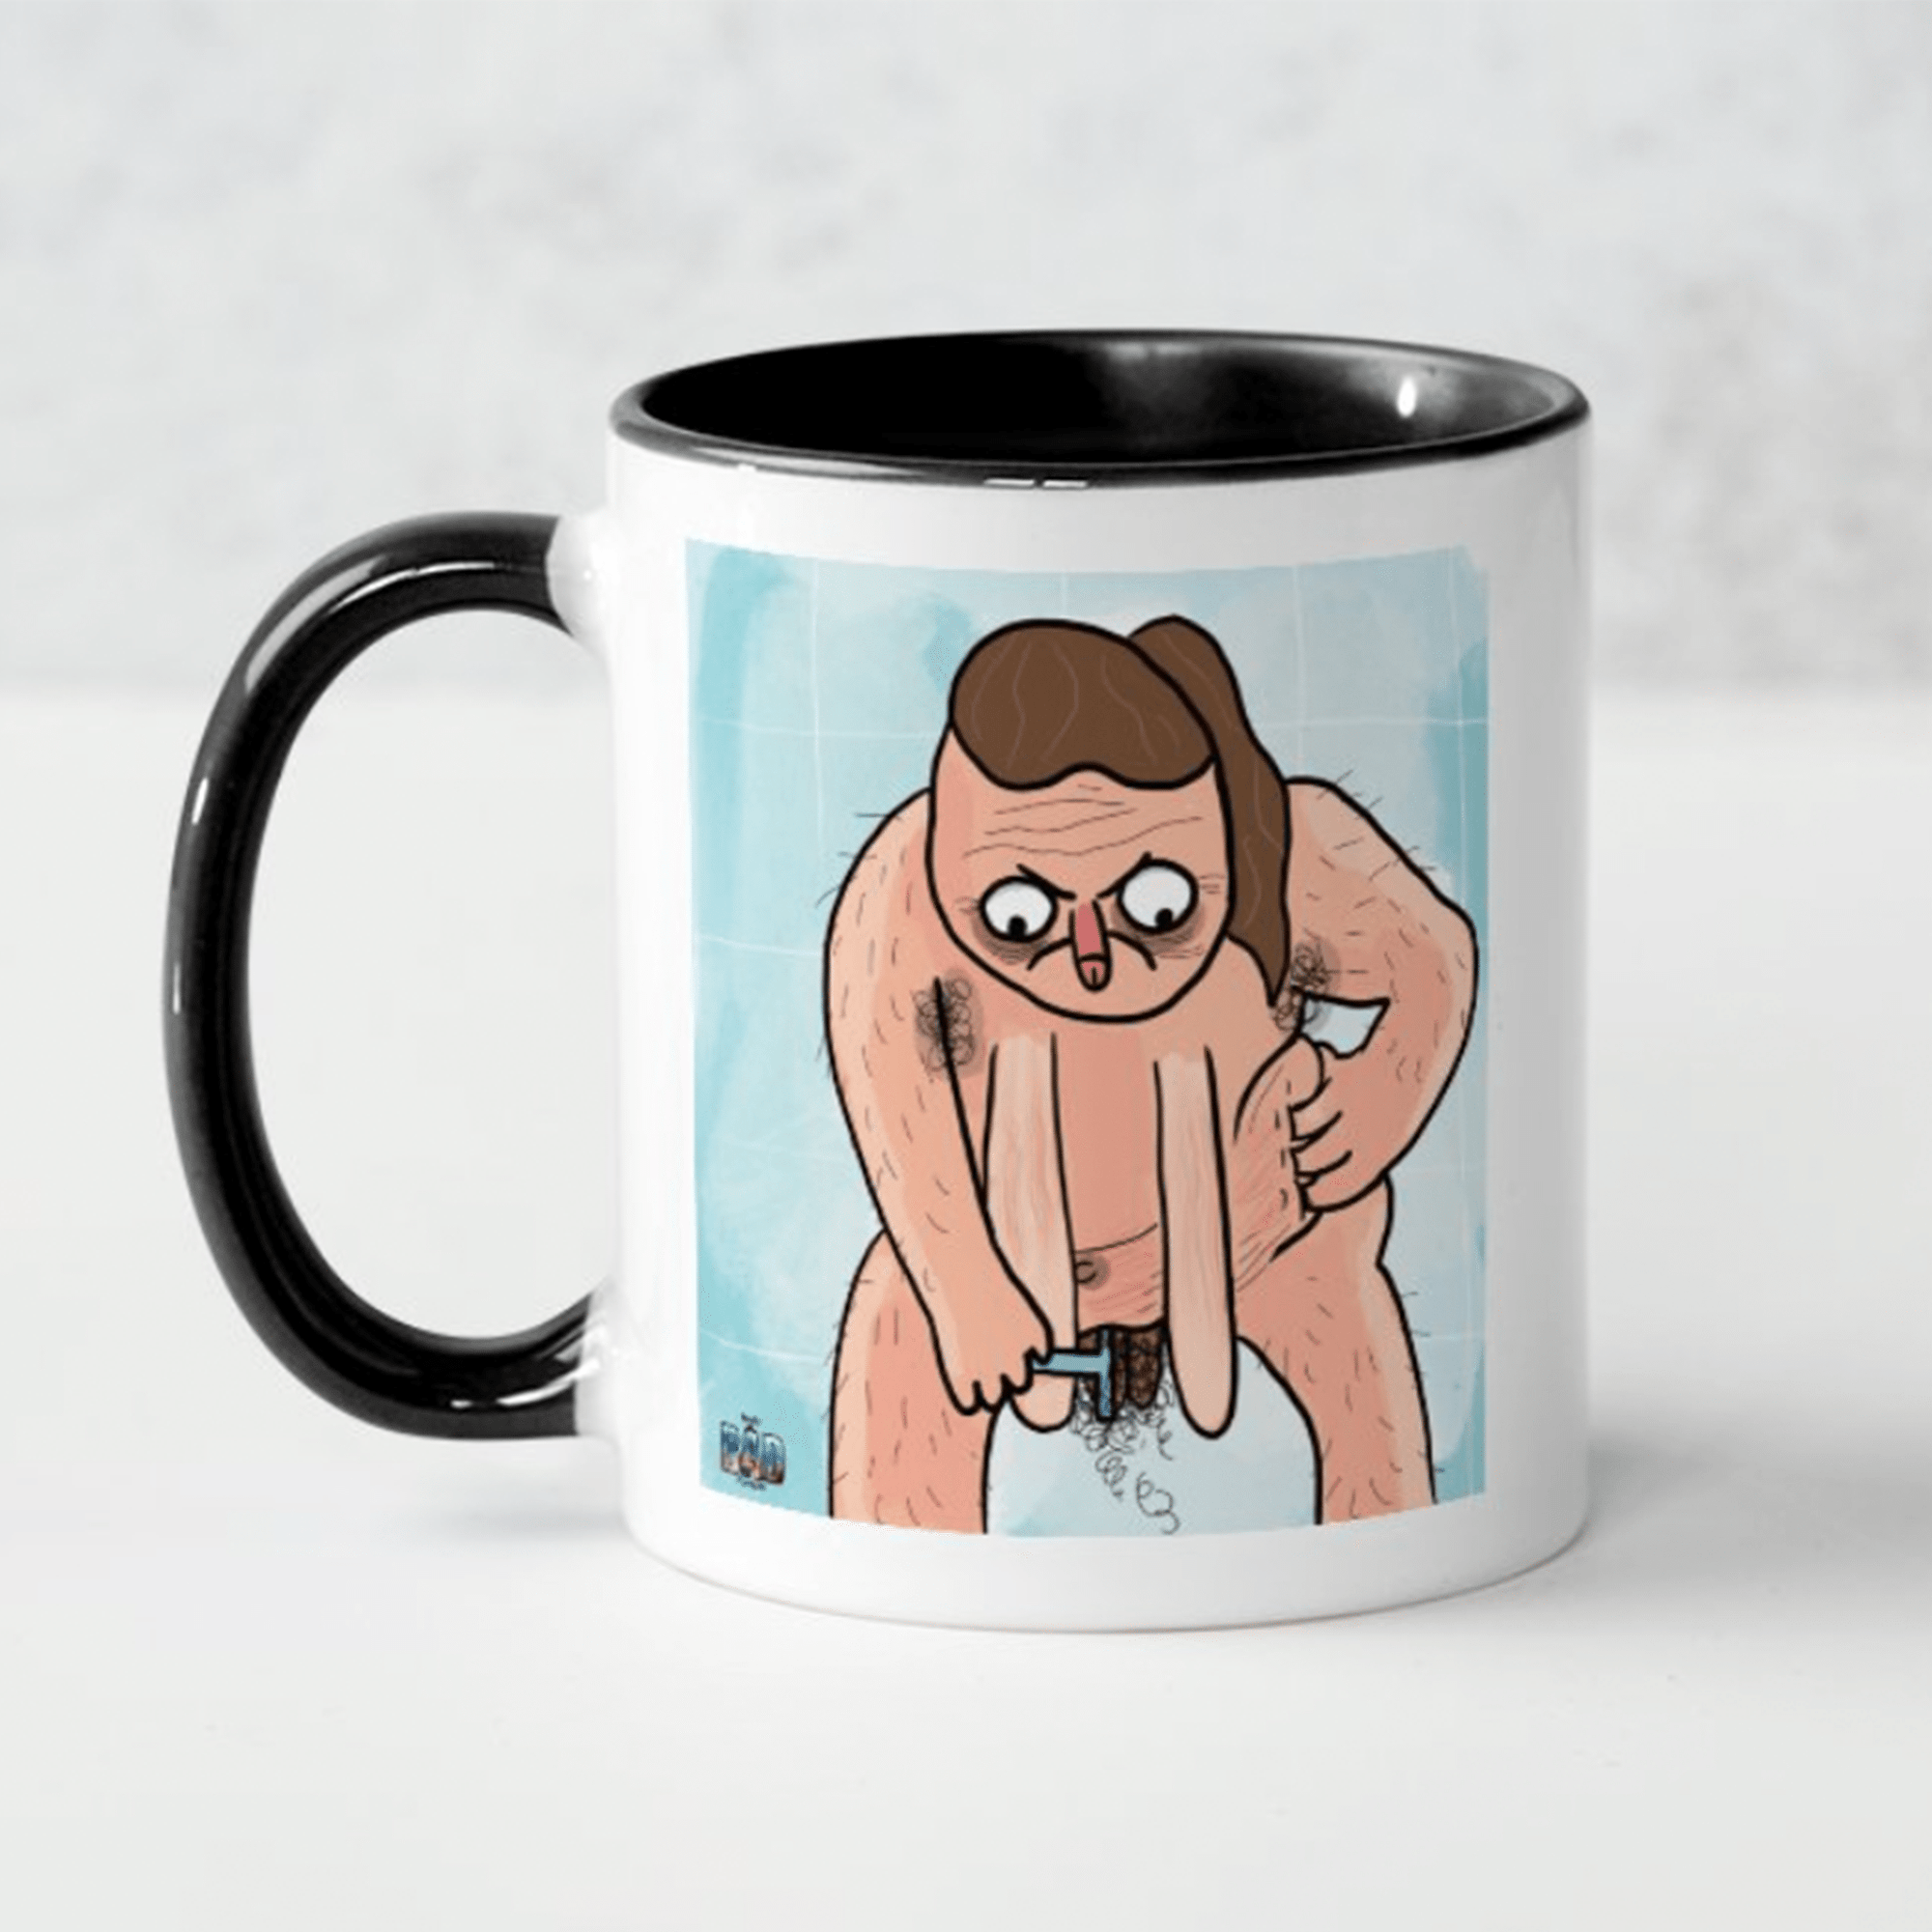 TIGC The Inappropriate Gift Co Knob Nose Sally Mug